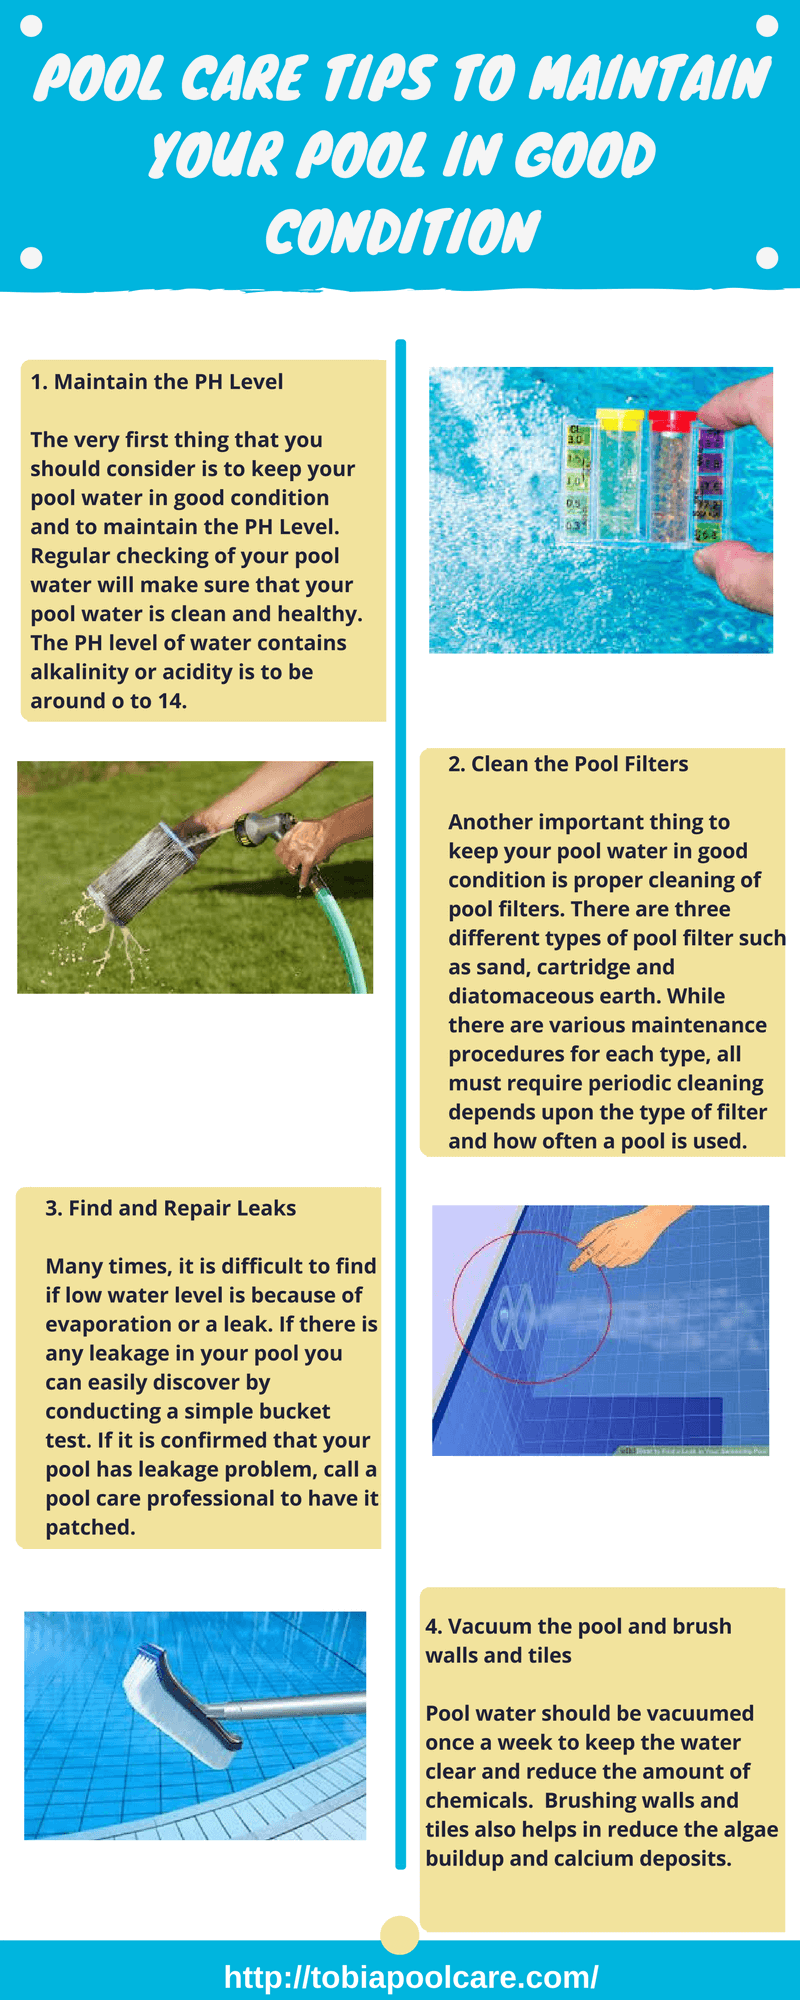 Pool Care Tips to Maintain Your Pool in Good Condition